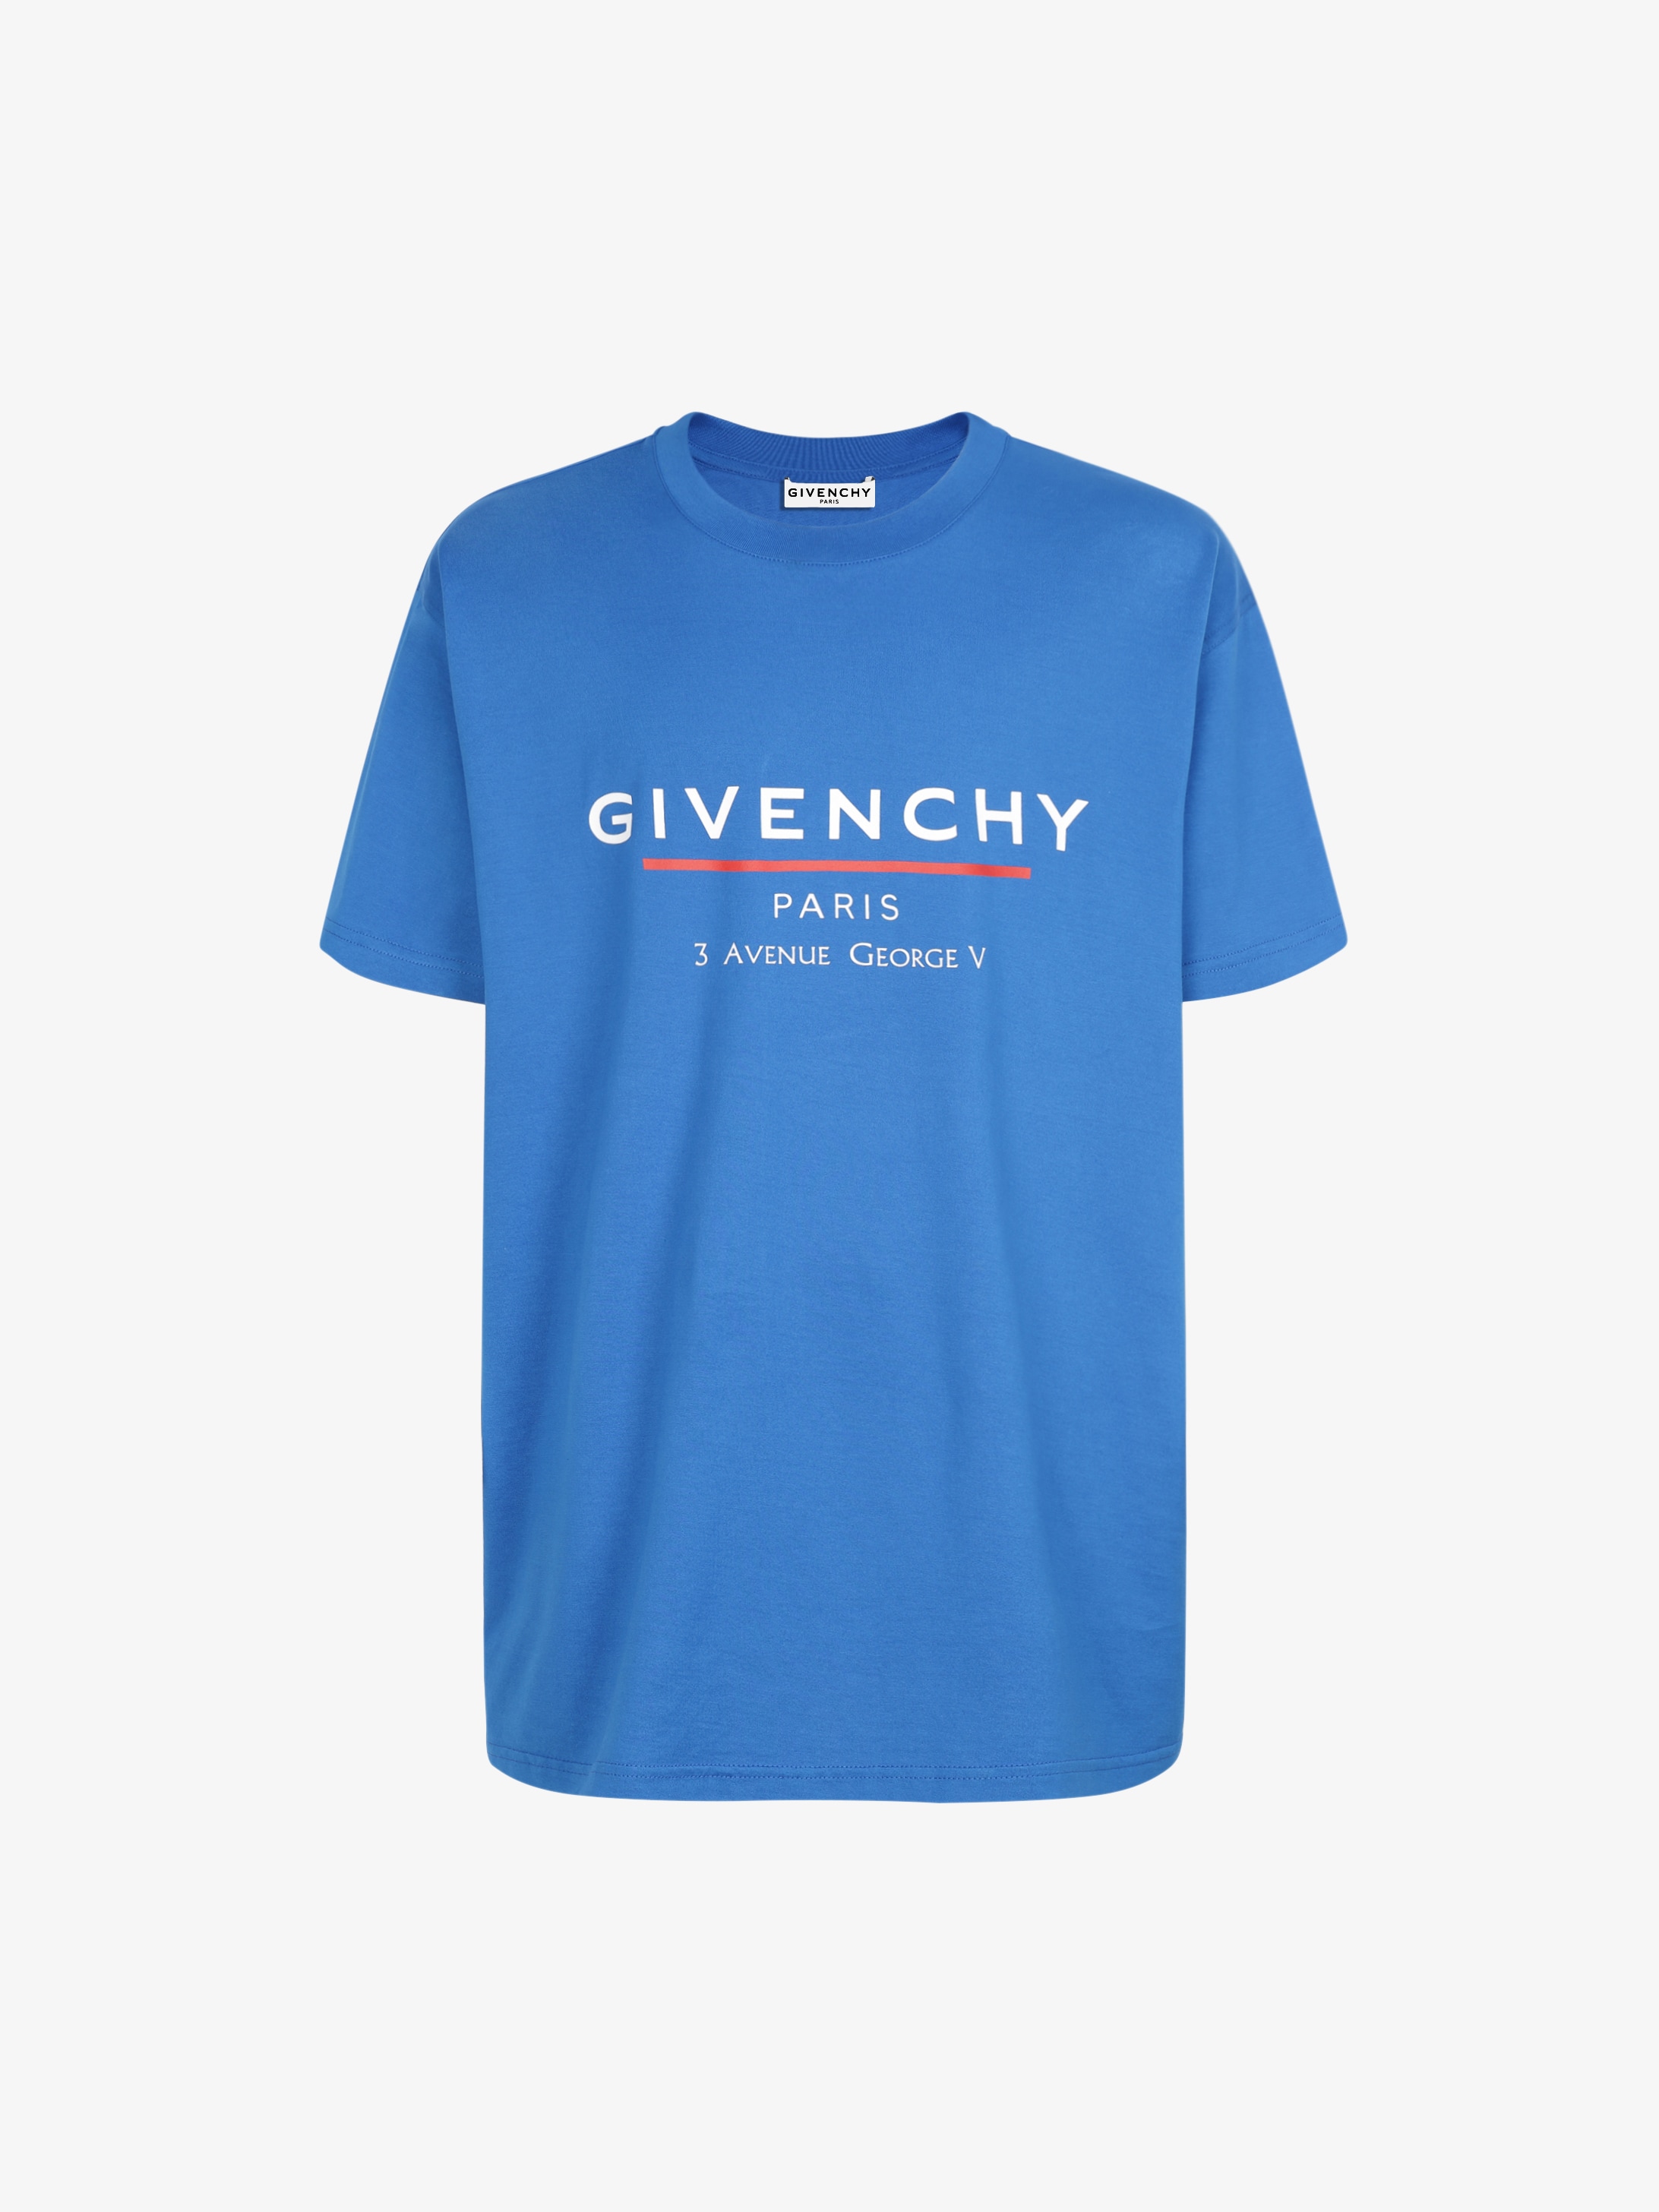 GIVENCHY Label printed oversized t-shirt | GIVENCHY Paris